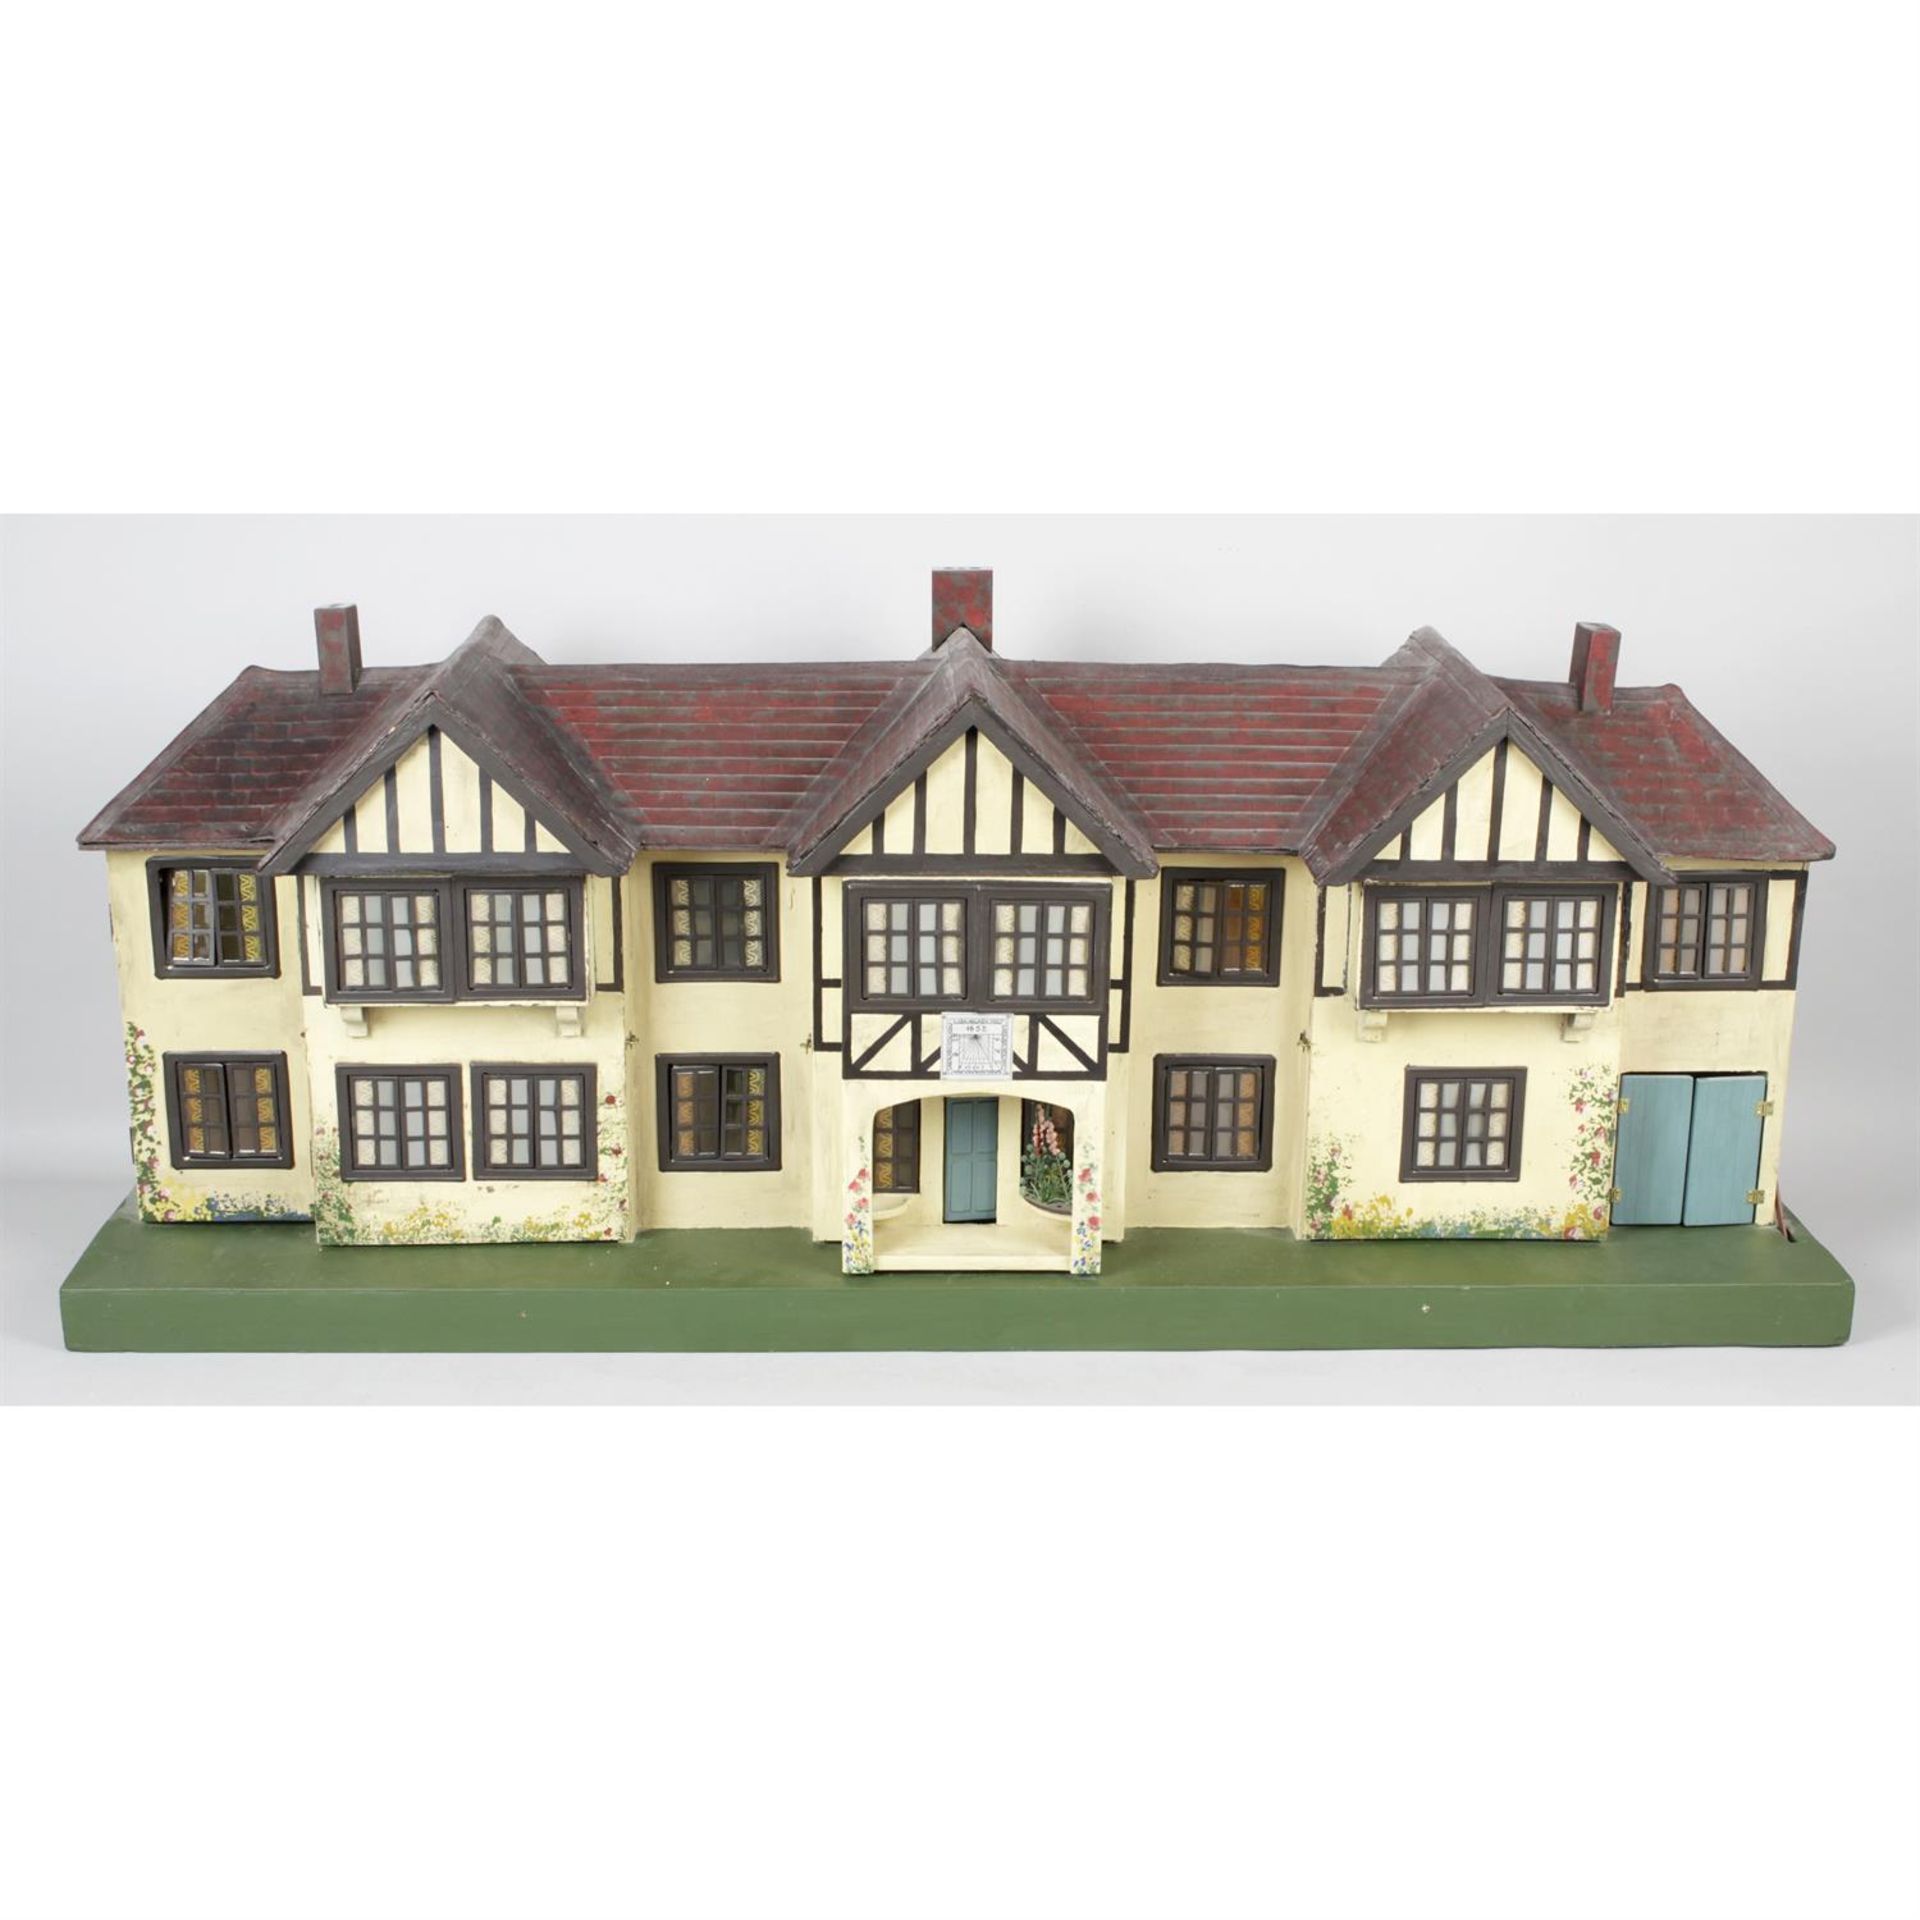 A mid 20th century Triang wooden dolls house, a1930's Triang example and an early 20th century